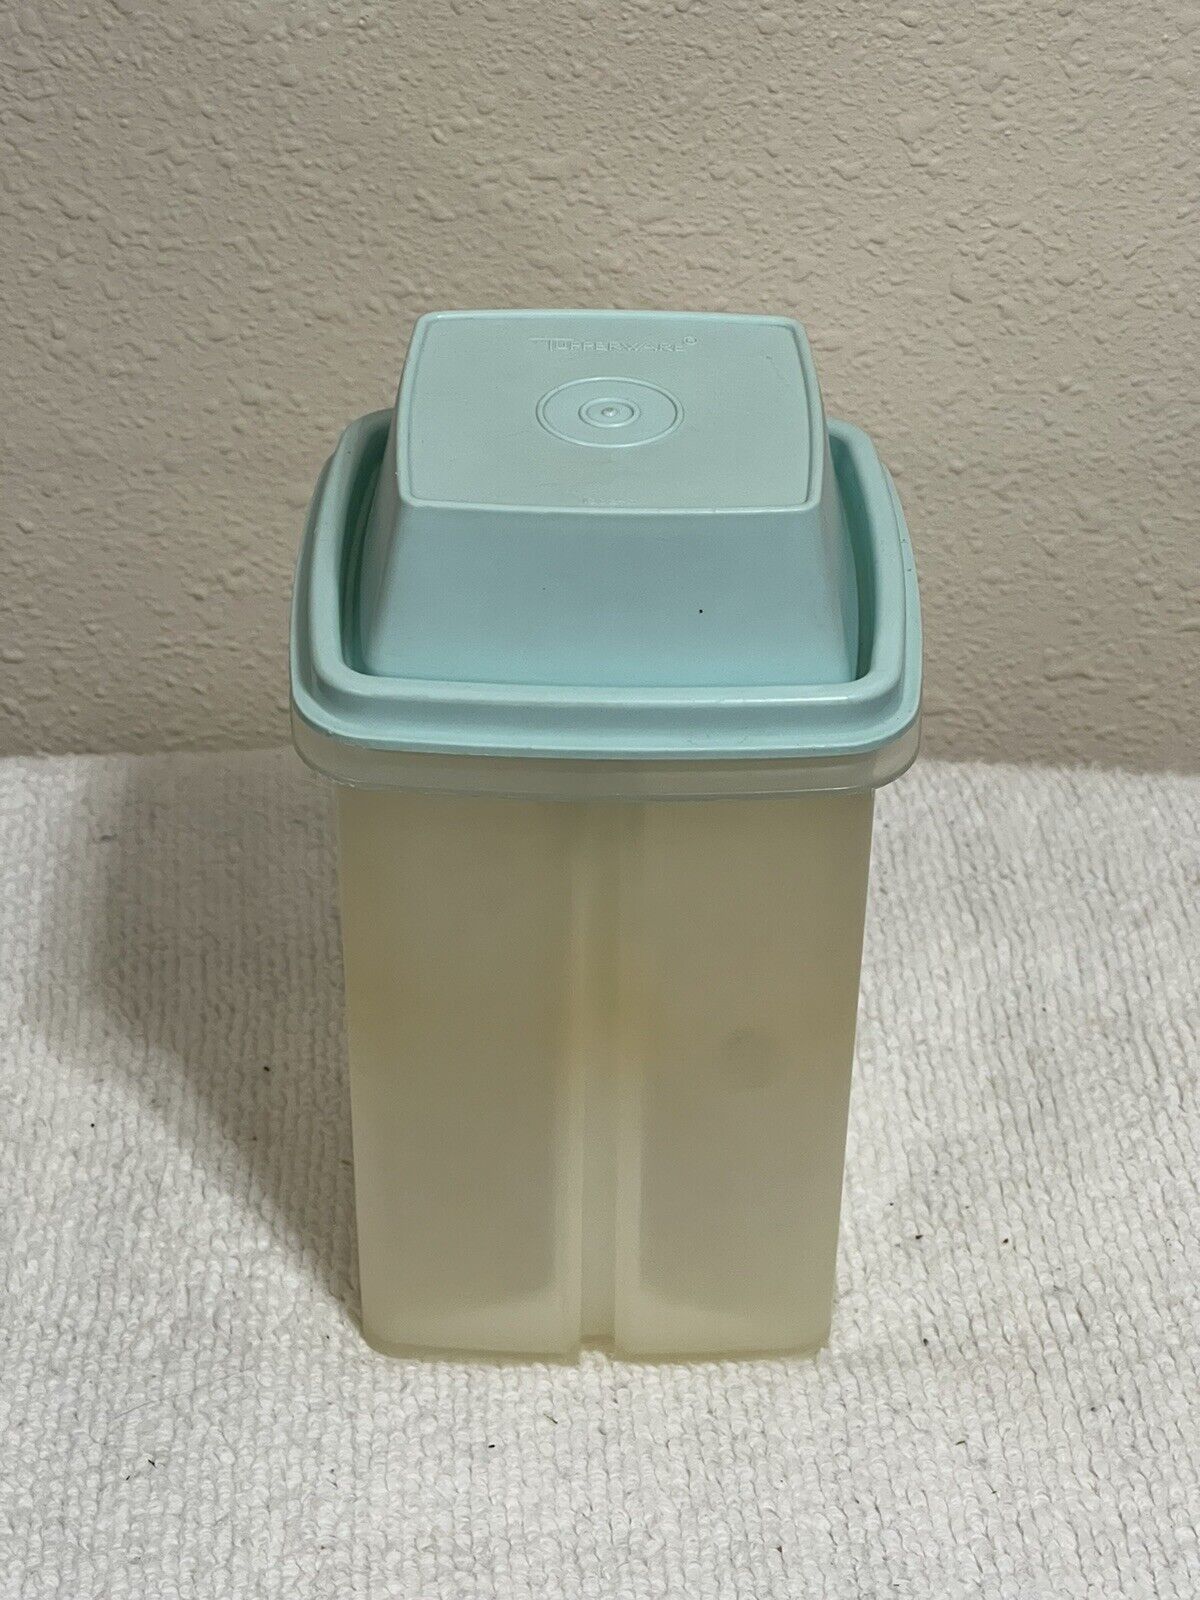 Tupperware Blue Lid Square Pickle Container Server Holder Store